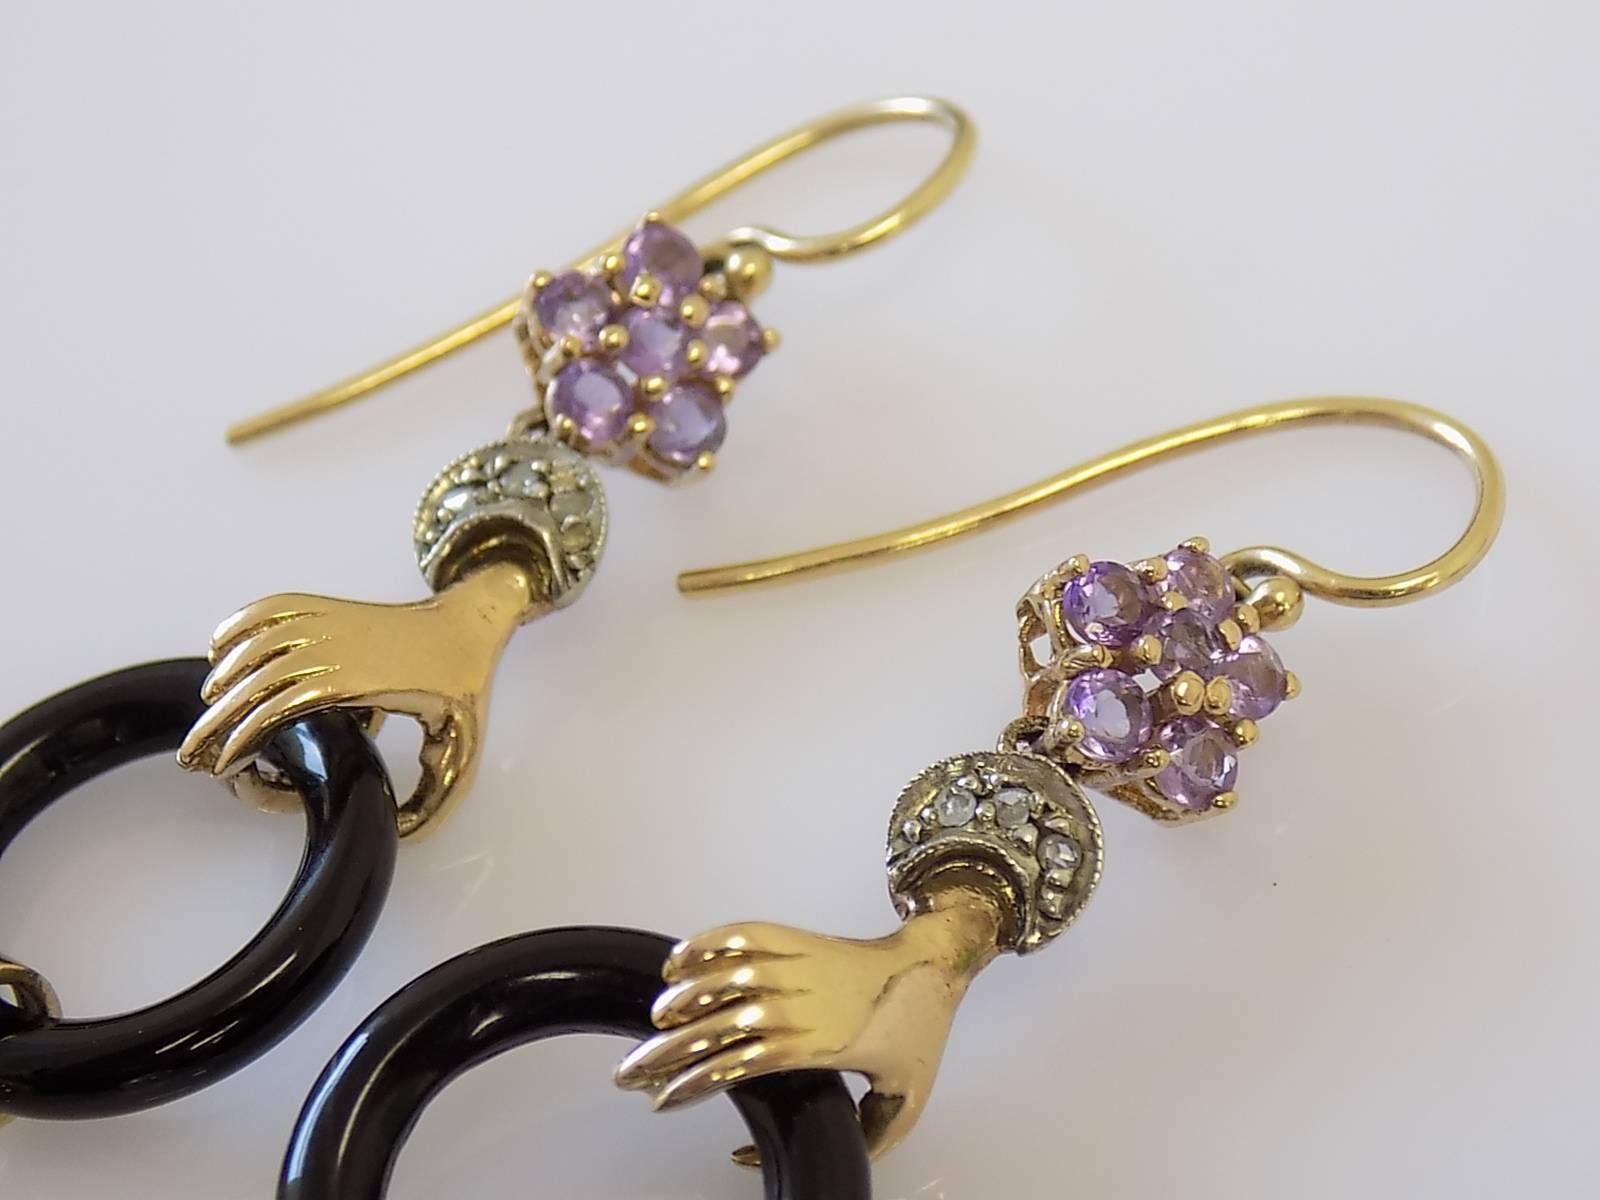 A Breathtaking Italian 14 Carat Gold drop earrings. Each earring designed as a hand with a rose cut Diamond cuff holding 16mm black Onyx and 7mm Cultured Pearl and Tanzanite flower above. Earrings made in Victorian style. Italian origin.
Total Drop